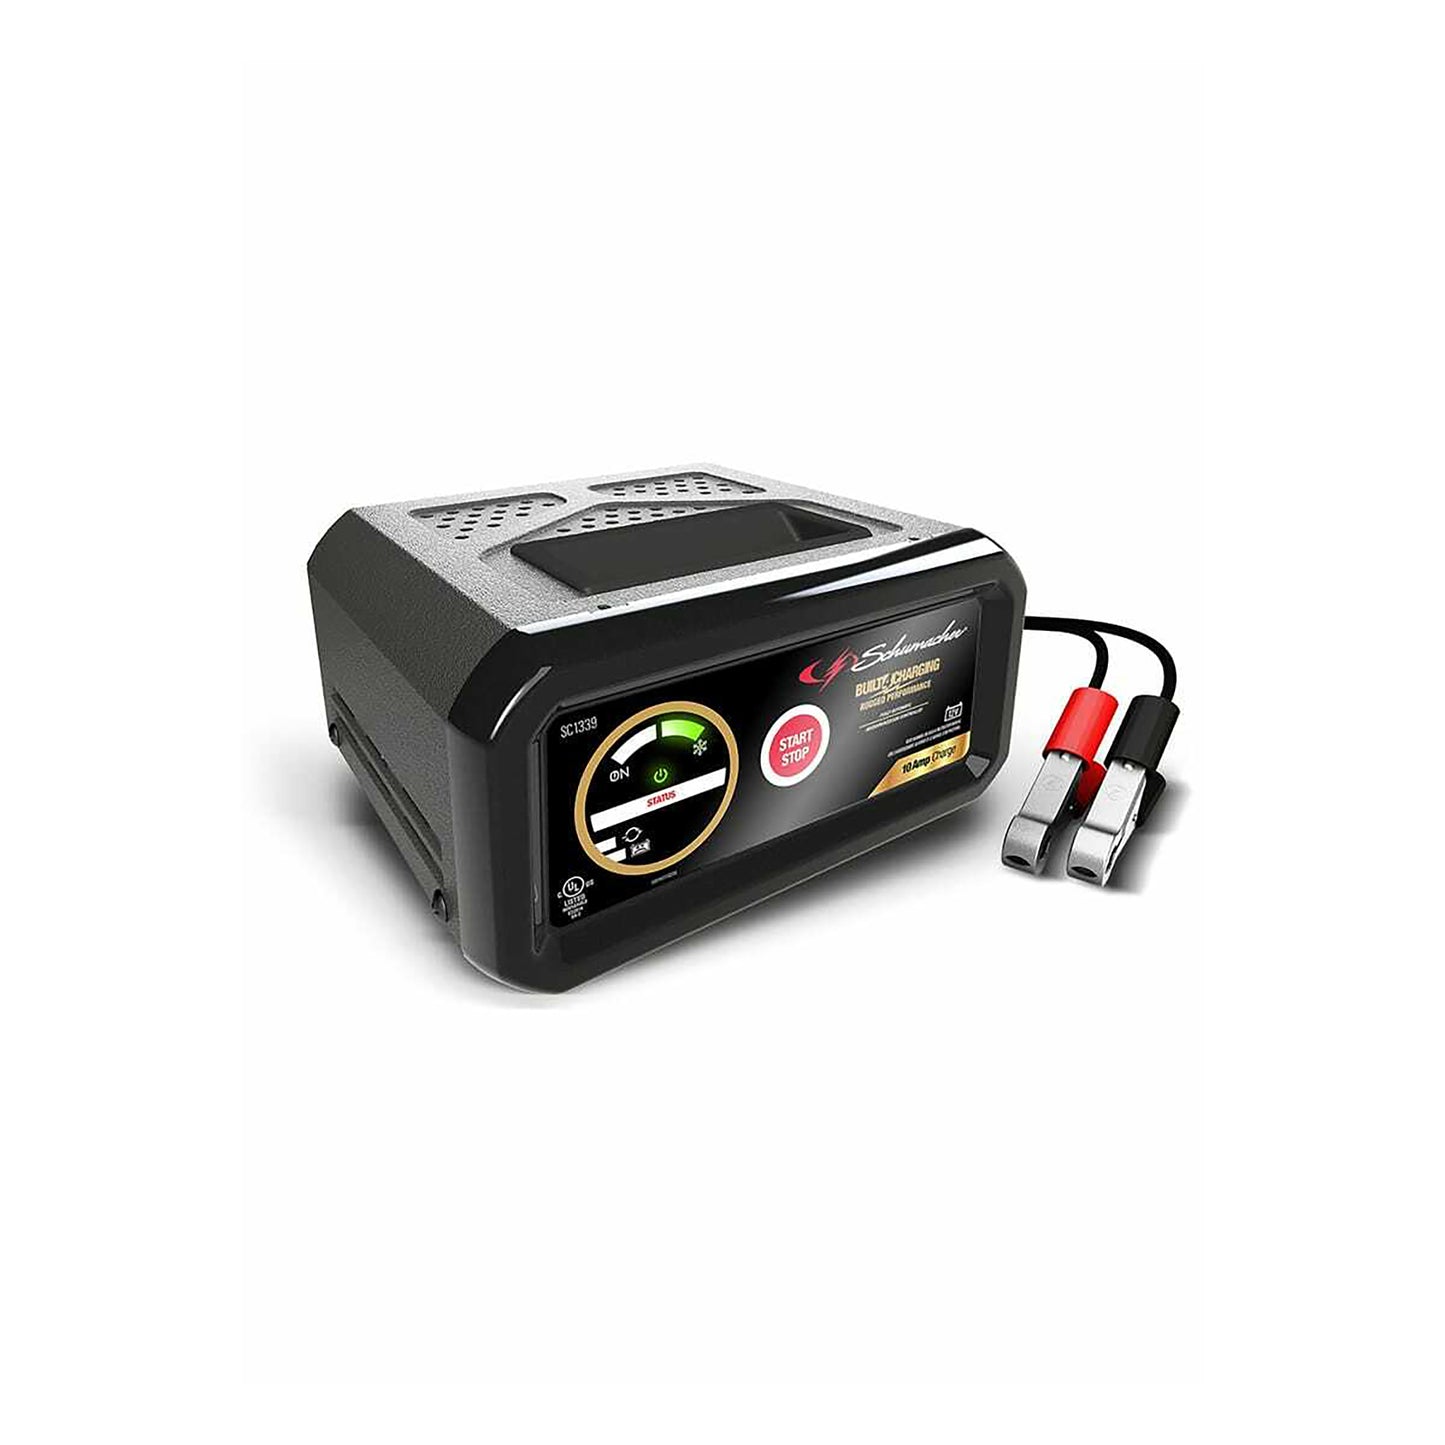 12V 2-10 AMP AUTOMATIC BATTERY CHARGER